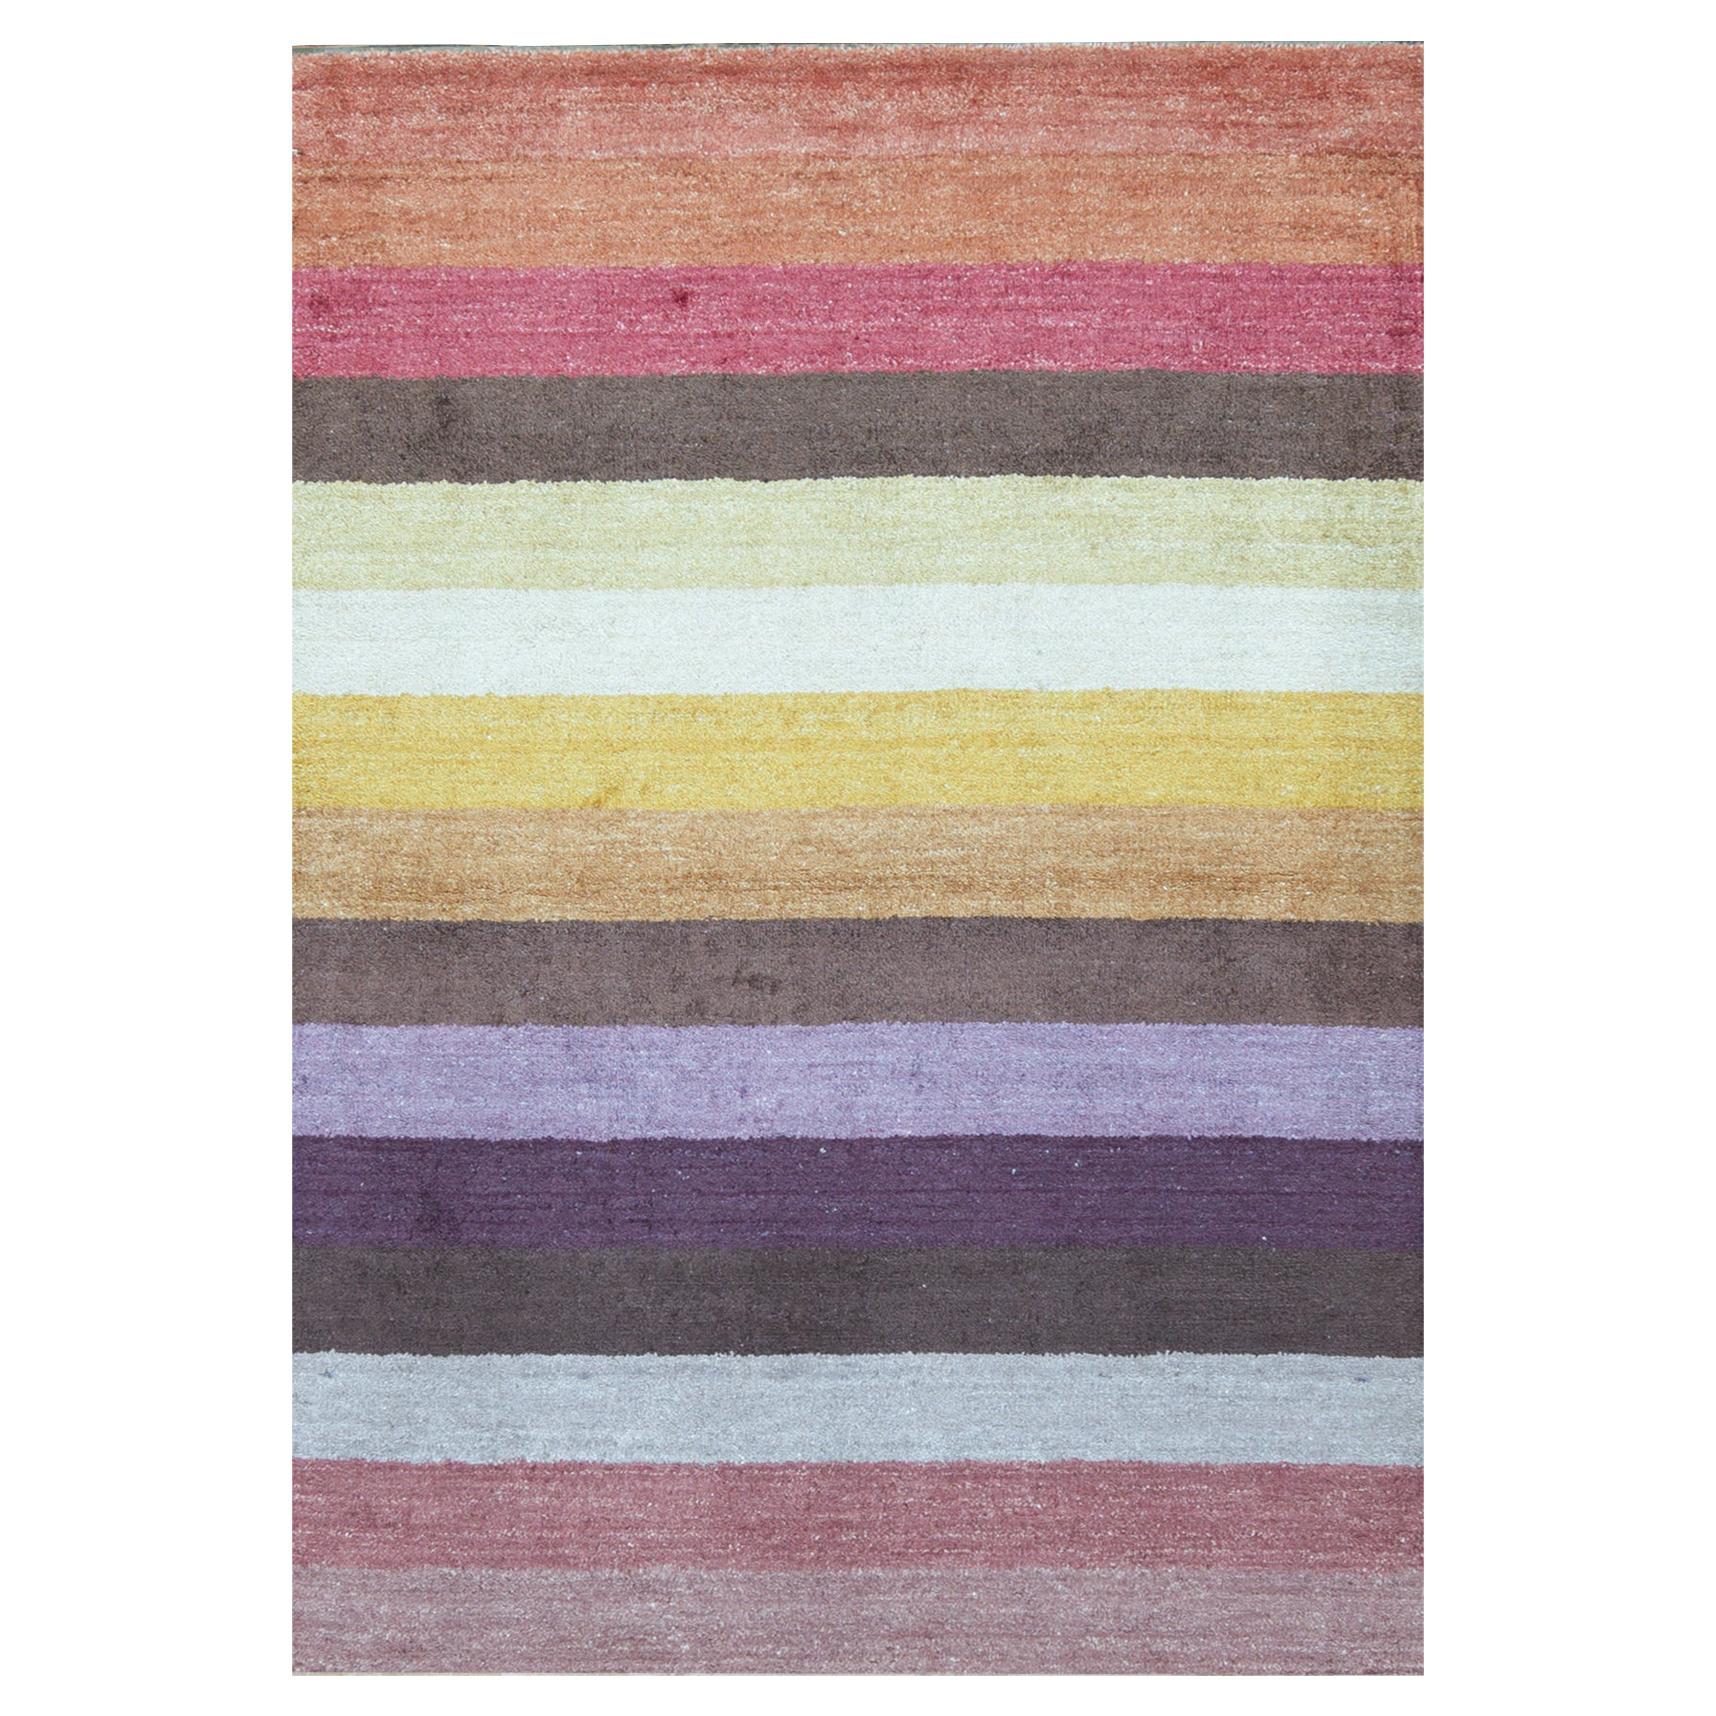 One-of-a-Kind Contemporary Handwoven Wool Area Rug 4'7 x 6'7 For Sale